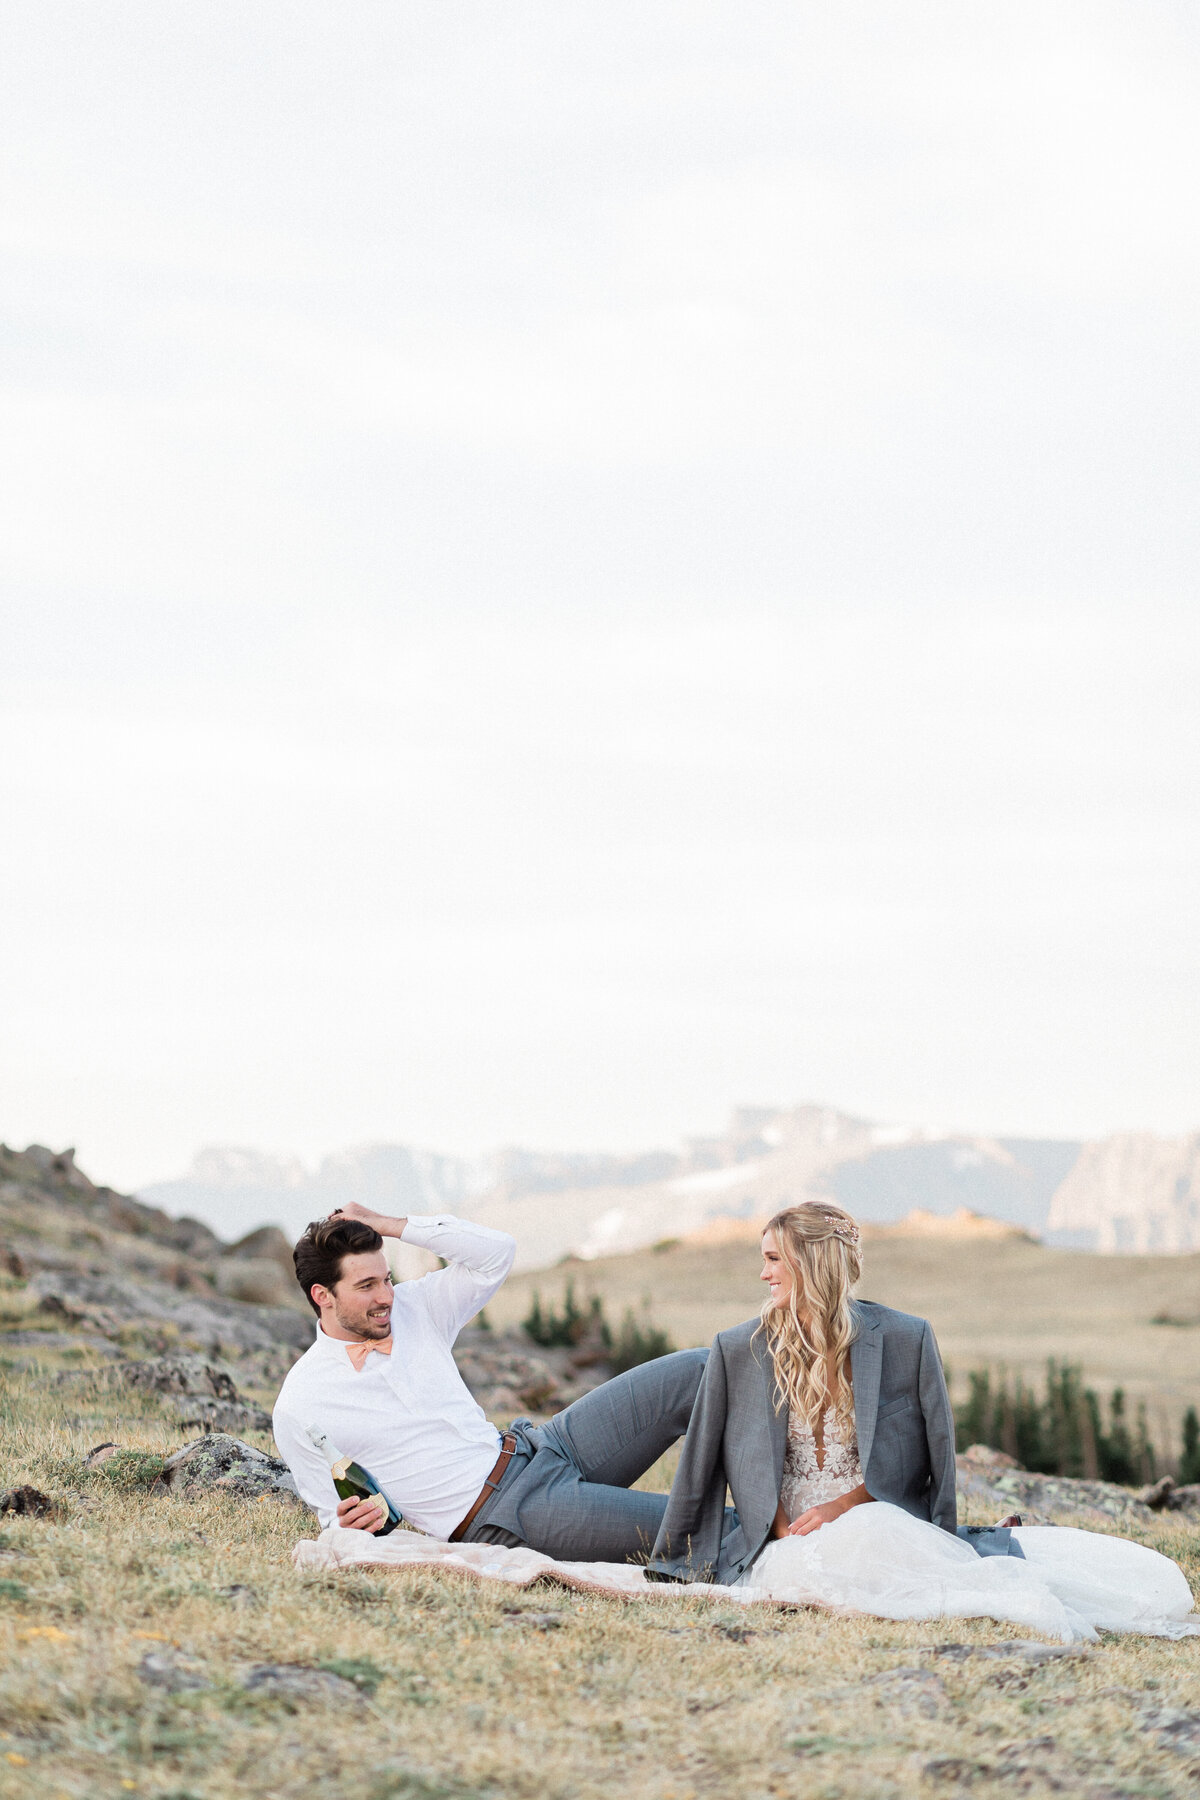 Rocky_Mounrain_National_Park_Colorado_Summer_Sunrise_Picnic_Elopement_by_Diana_Coulter-3